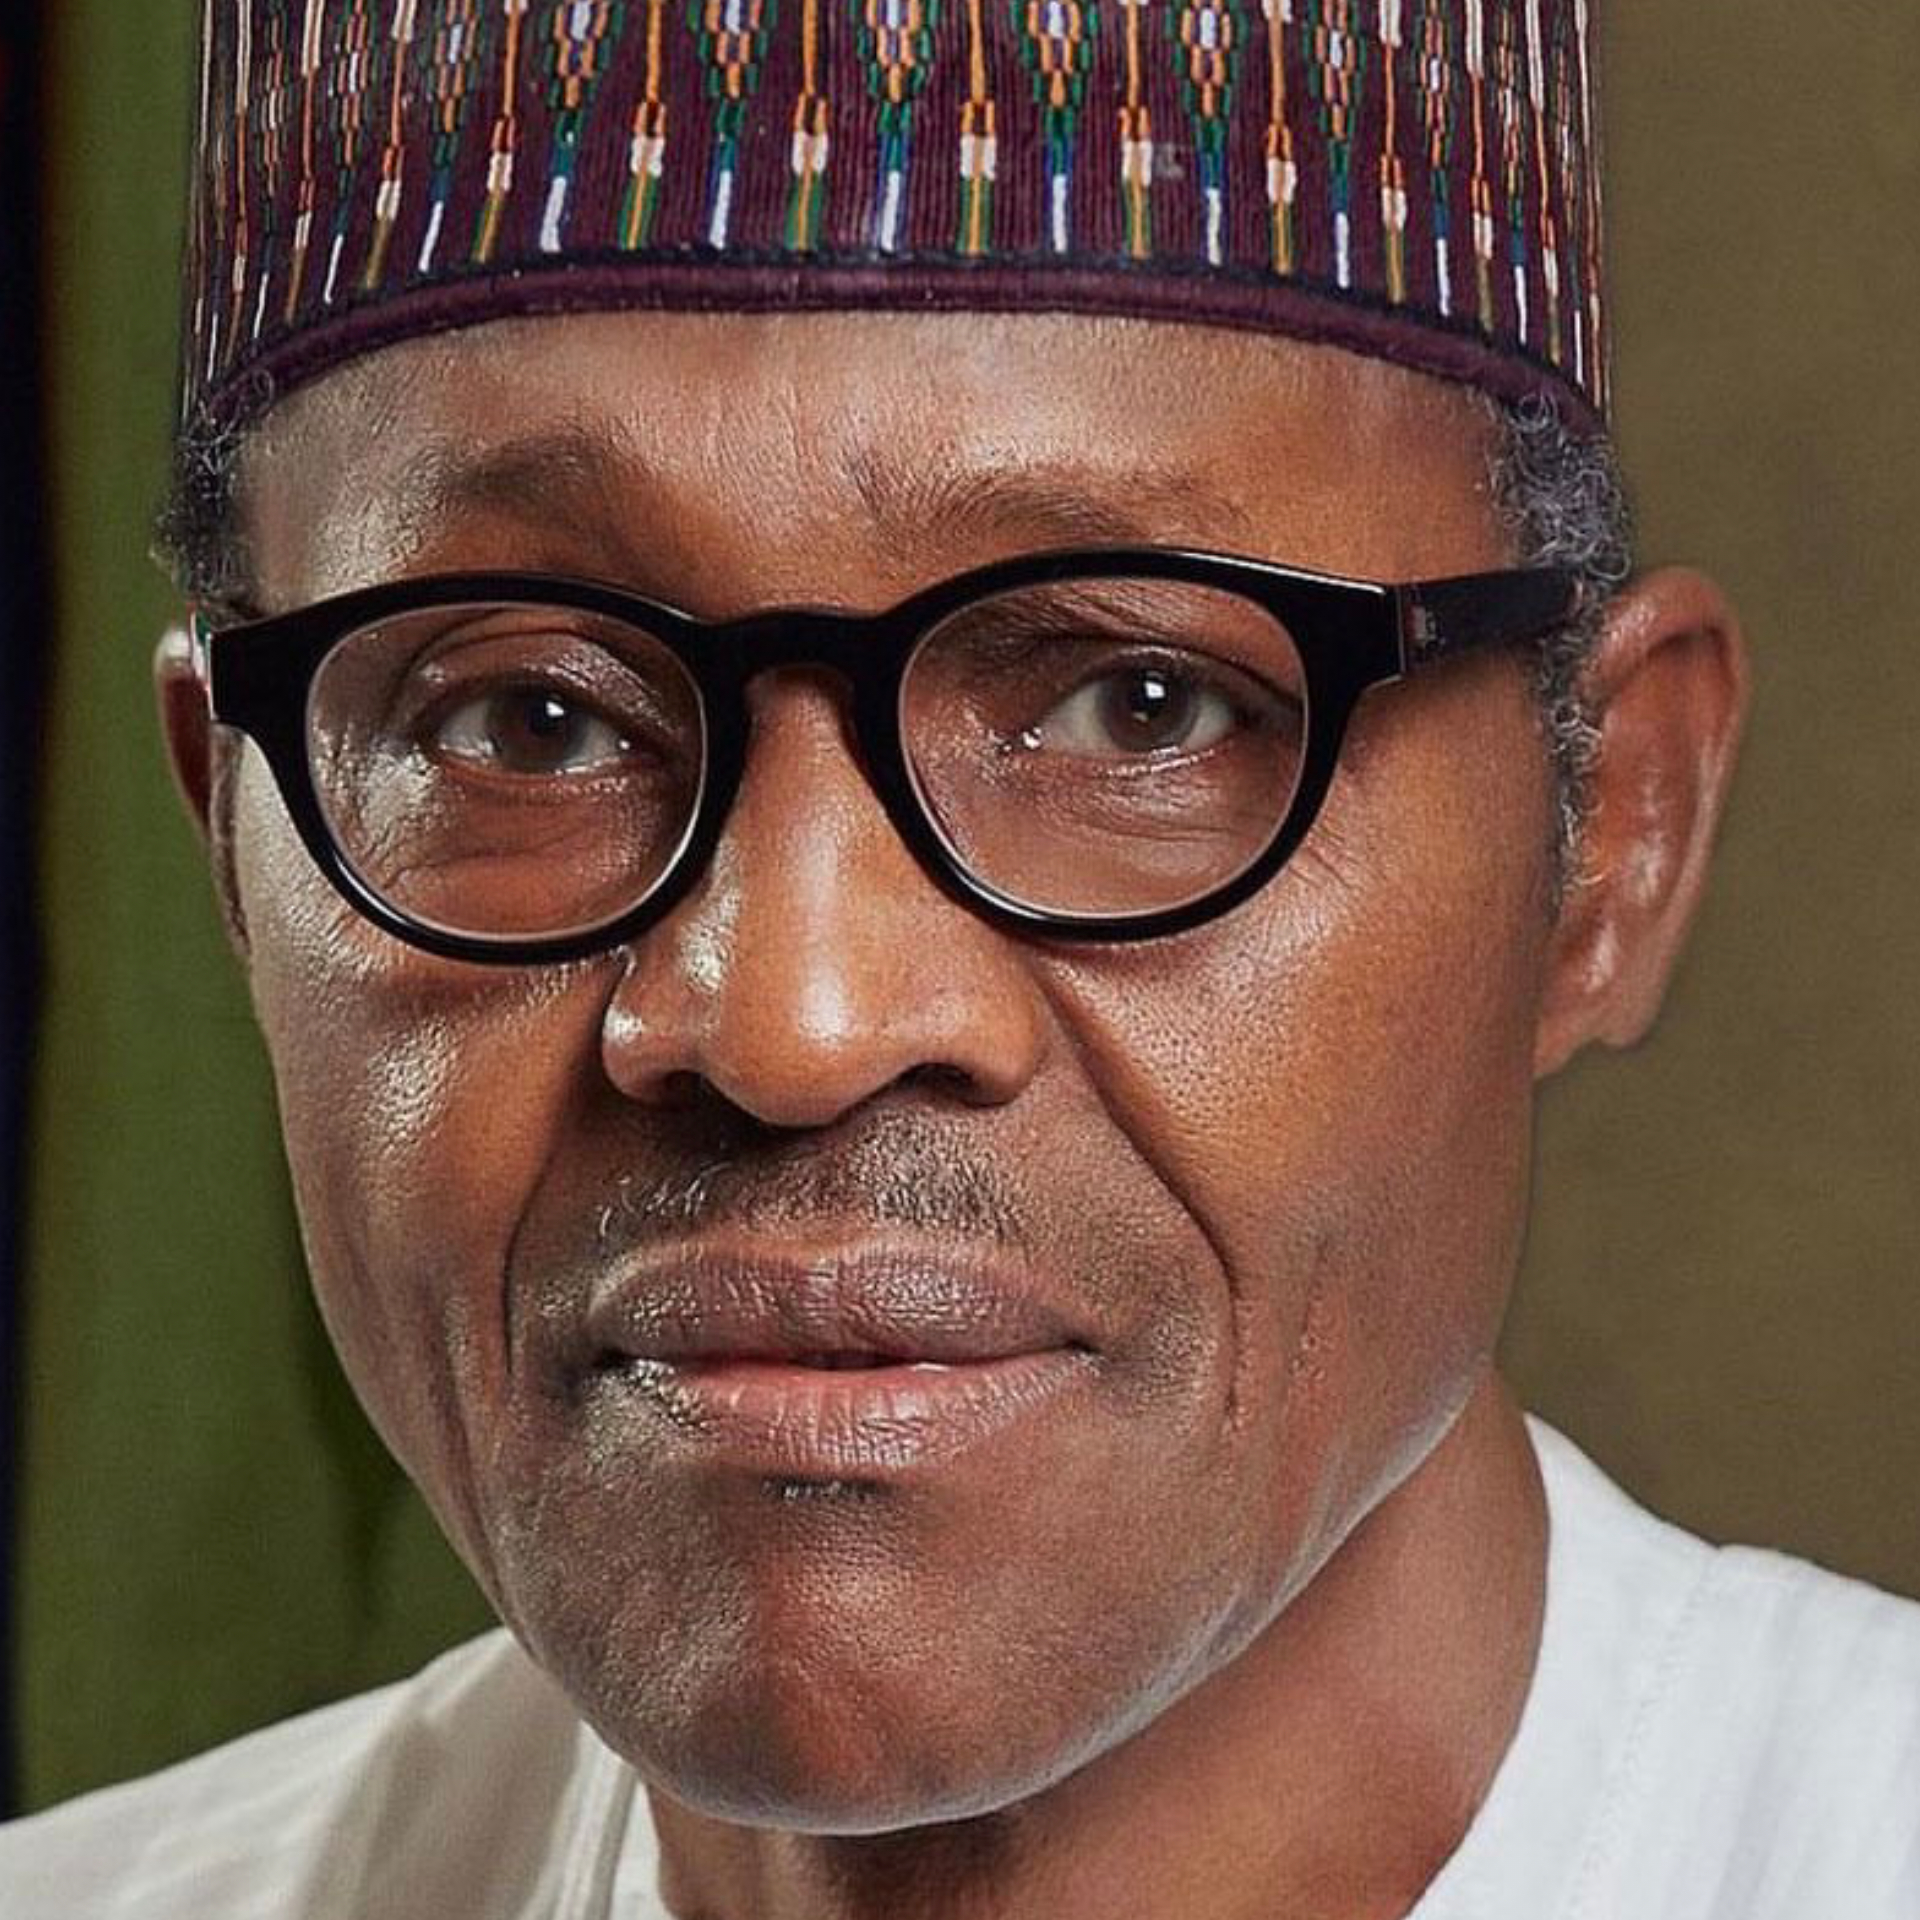 Cattles And Sheep Are Easy To Control Than Nigerians- Ex- President Buhari To Nigerians